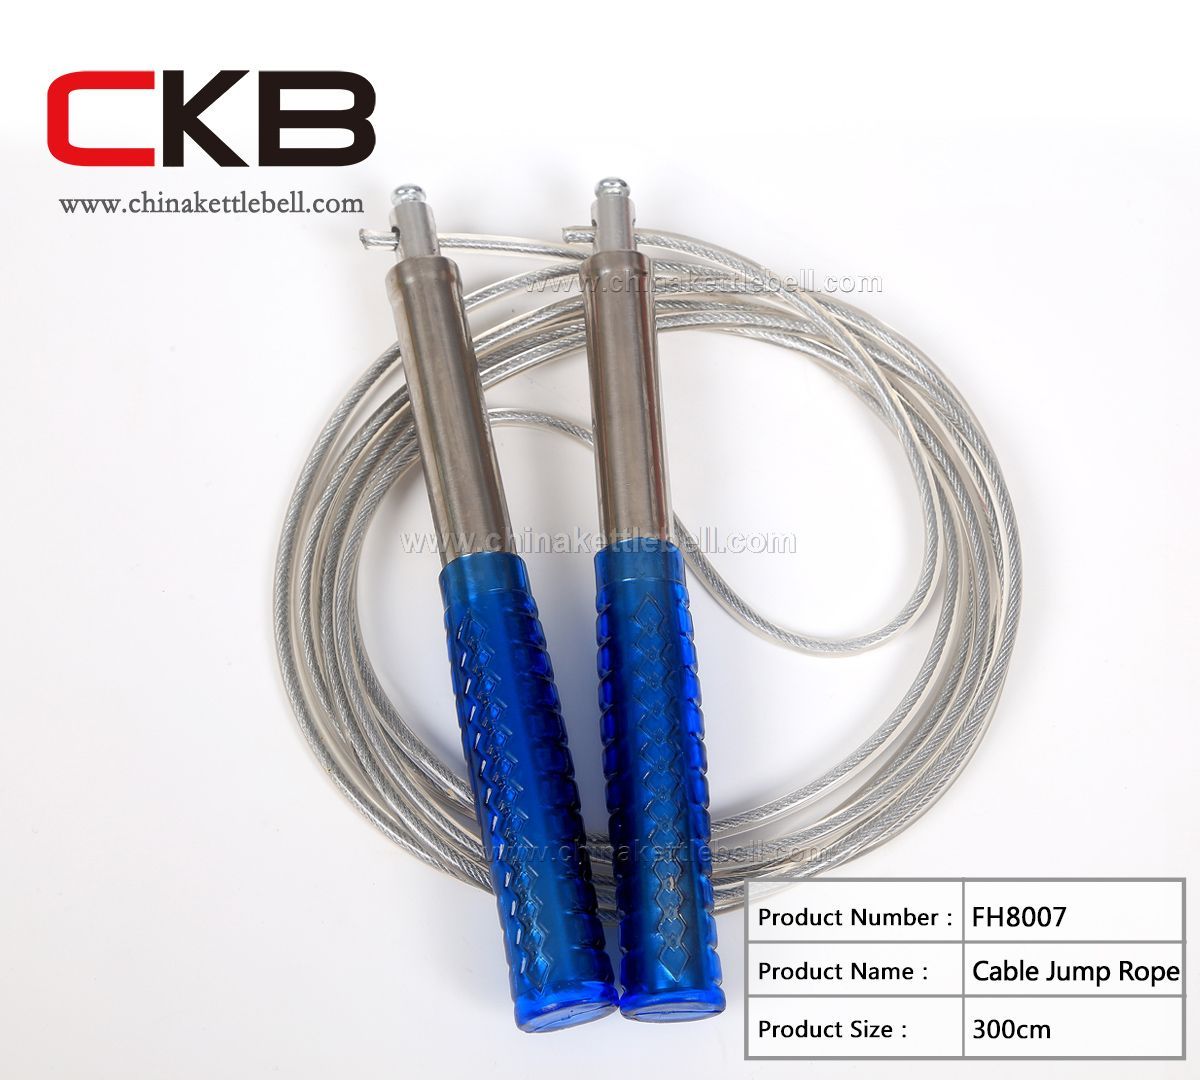 Cable Jump rope